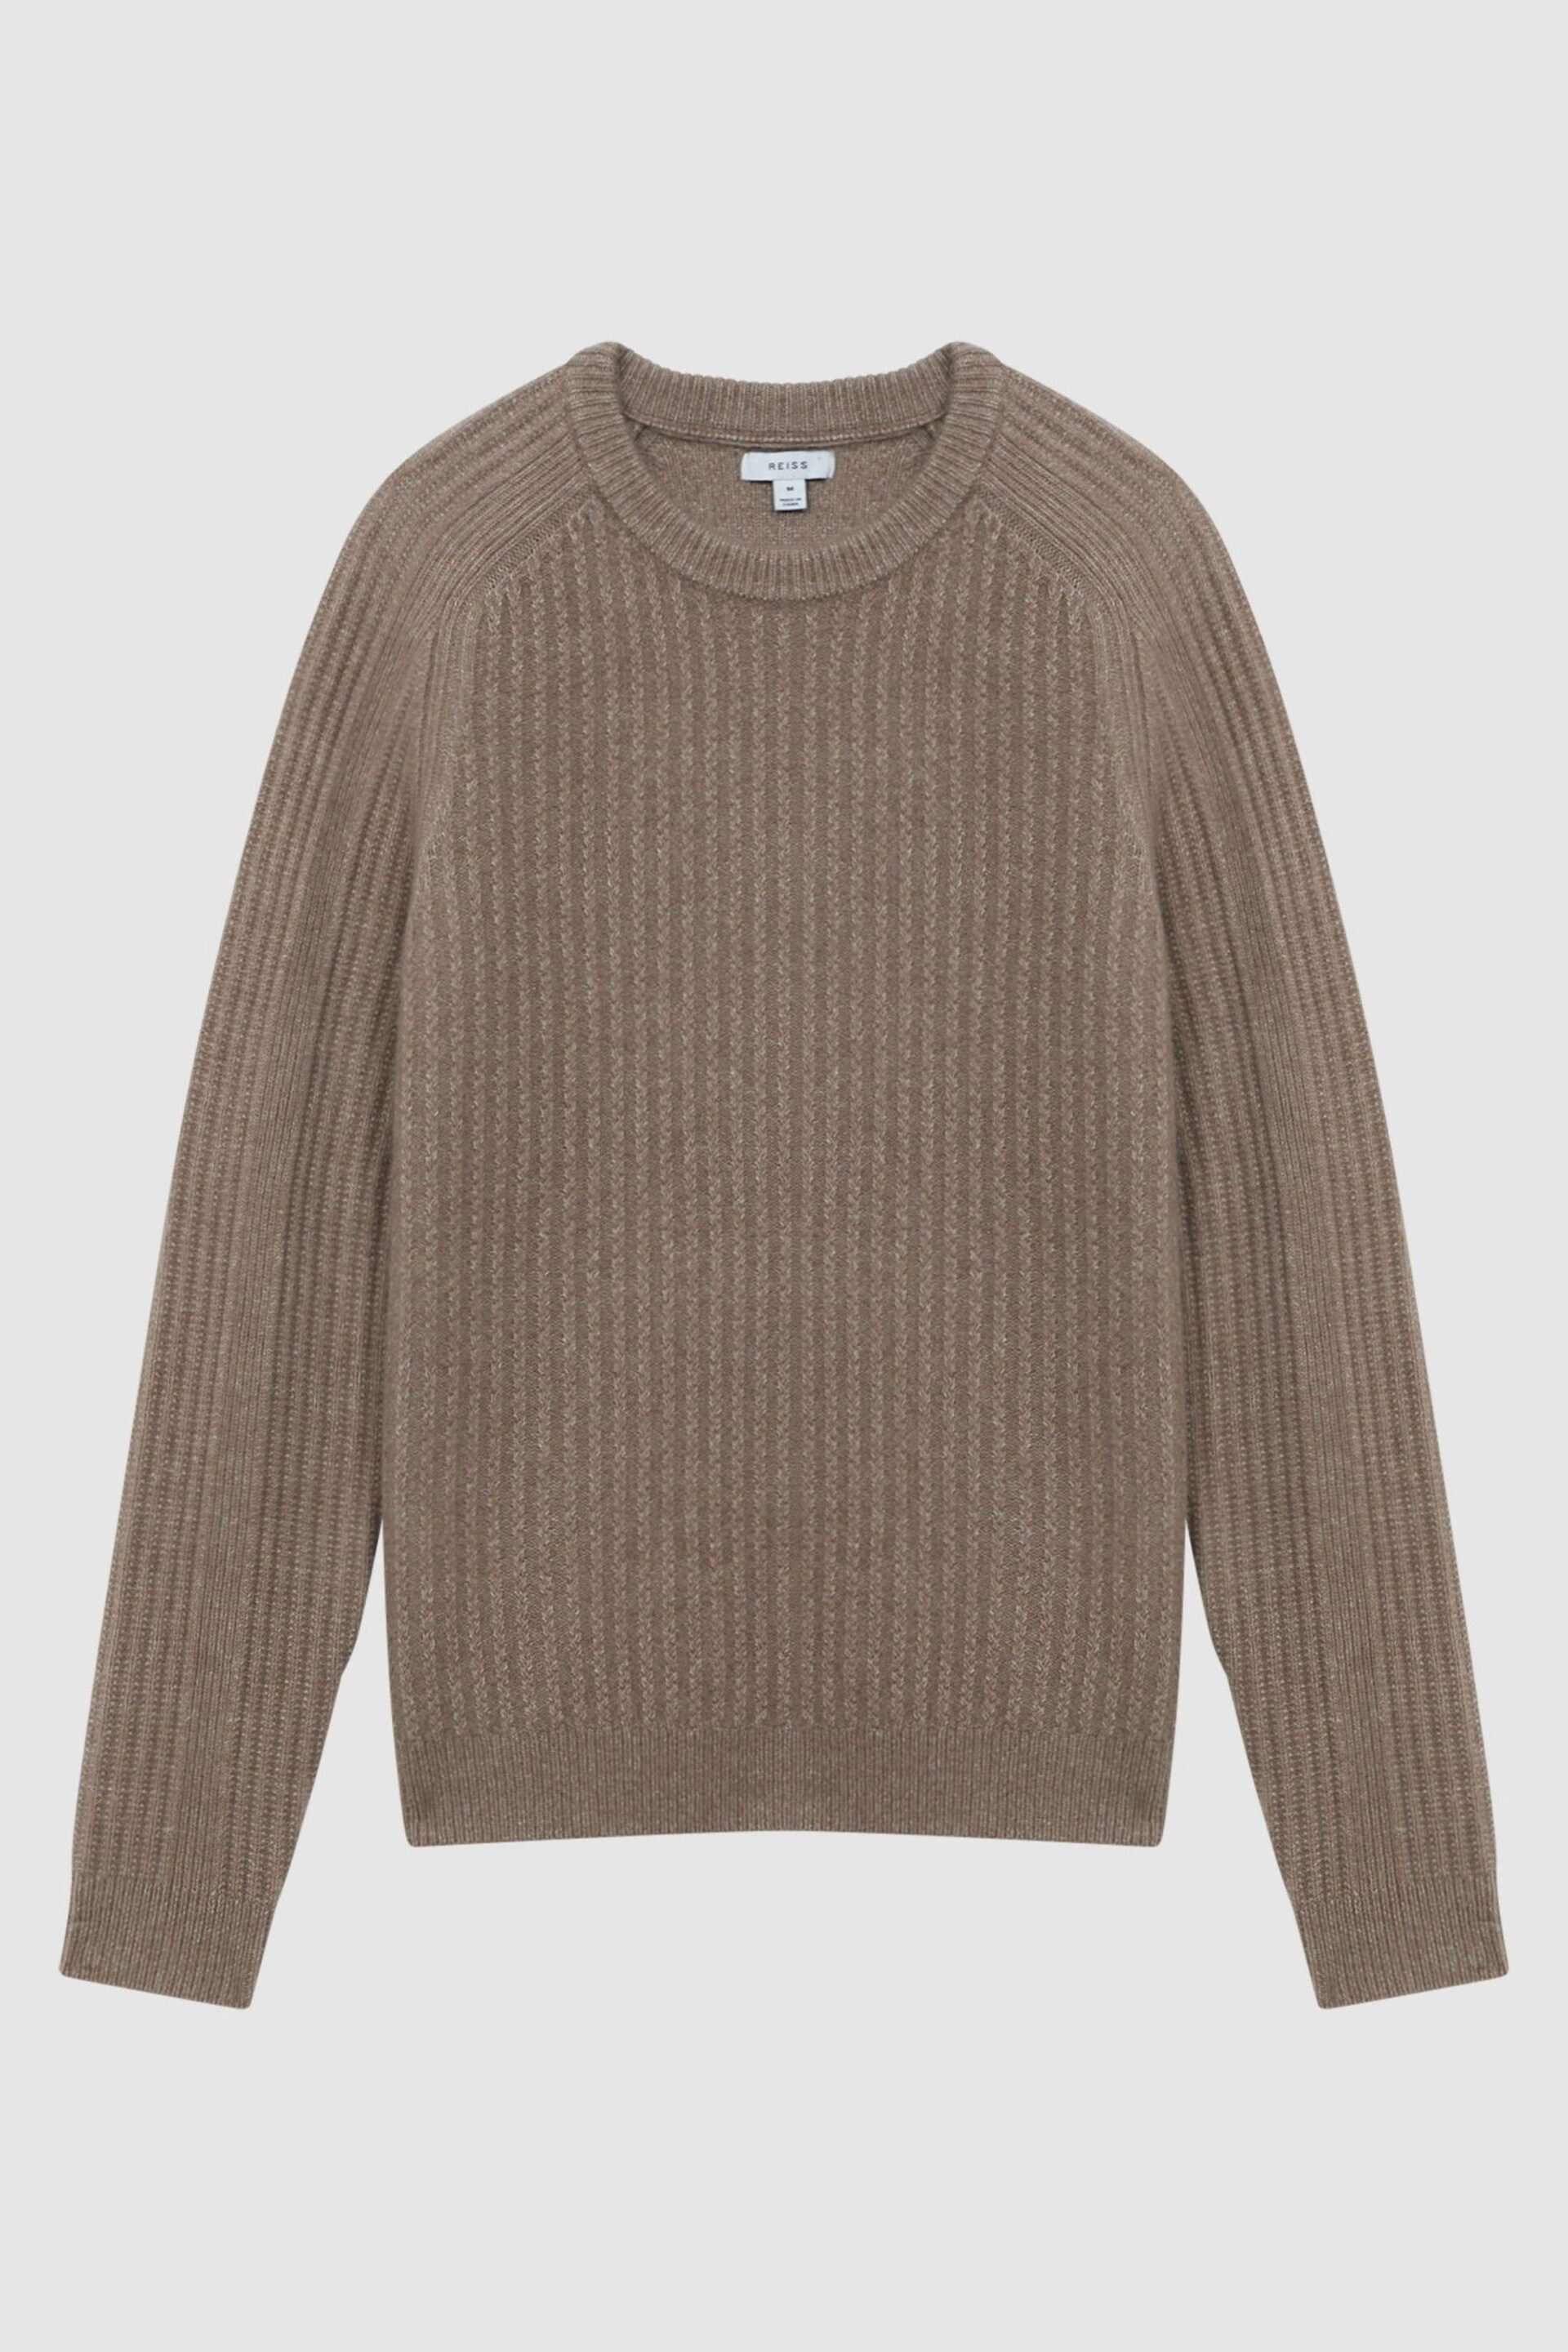 Reiss Mouse Melange Millerson Wool-Cotton Textured Crew Neck Jumper - Image 2 of 5